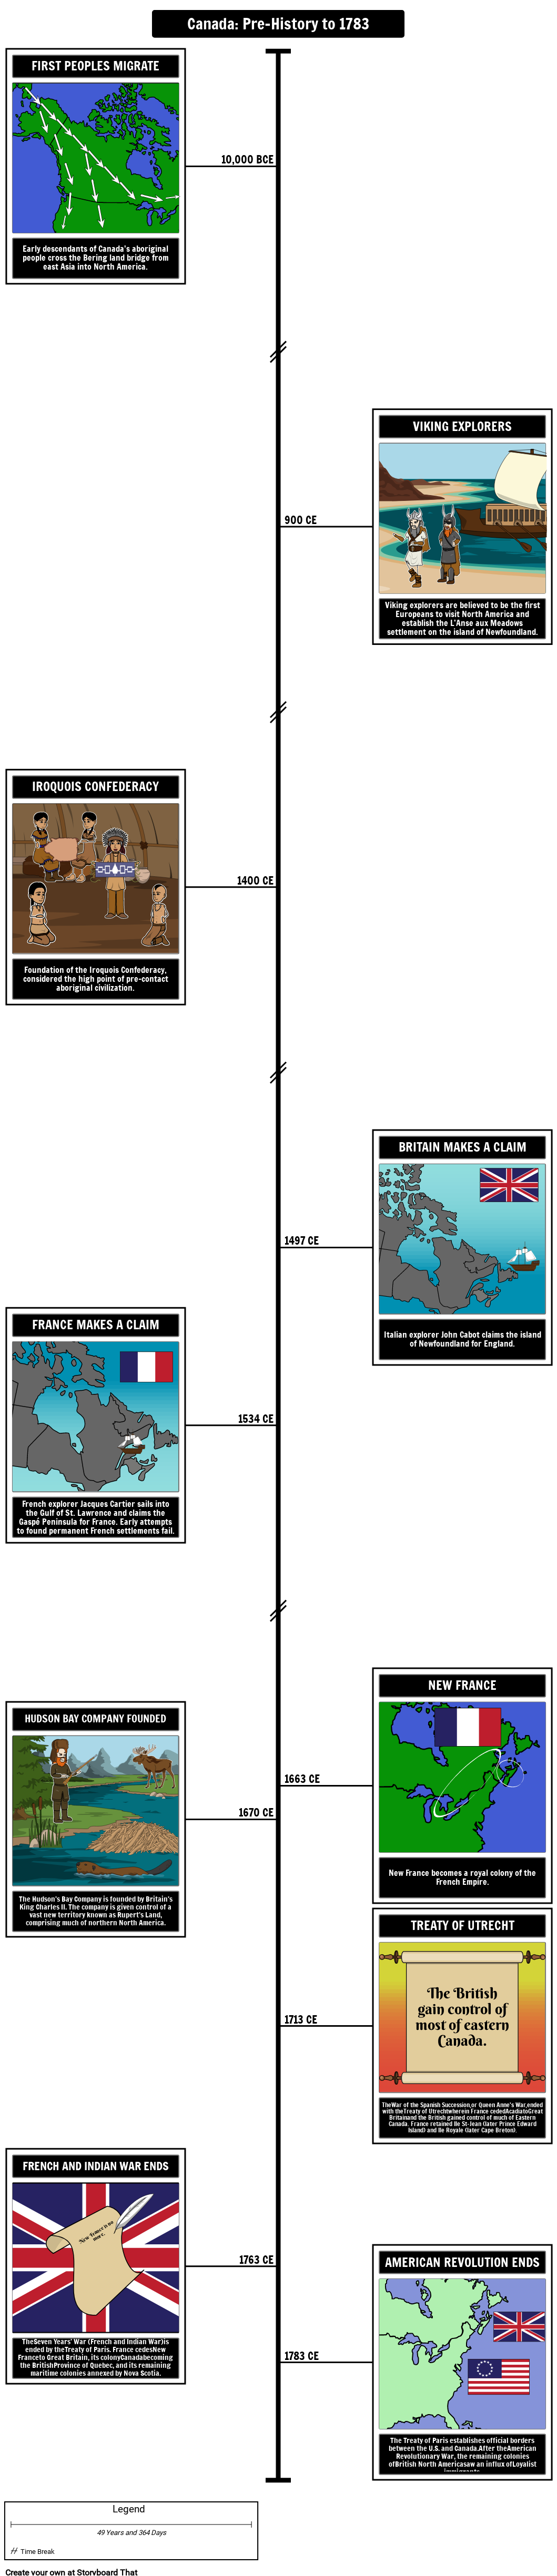 canadian-history-timeline-pre-history-to-1783